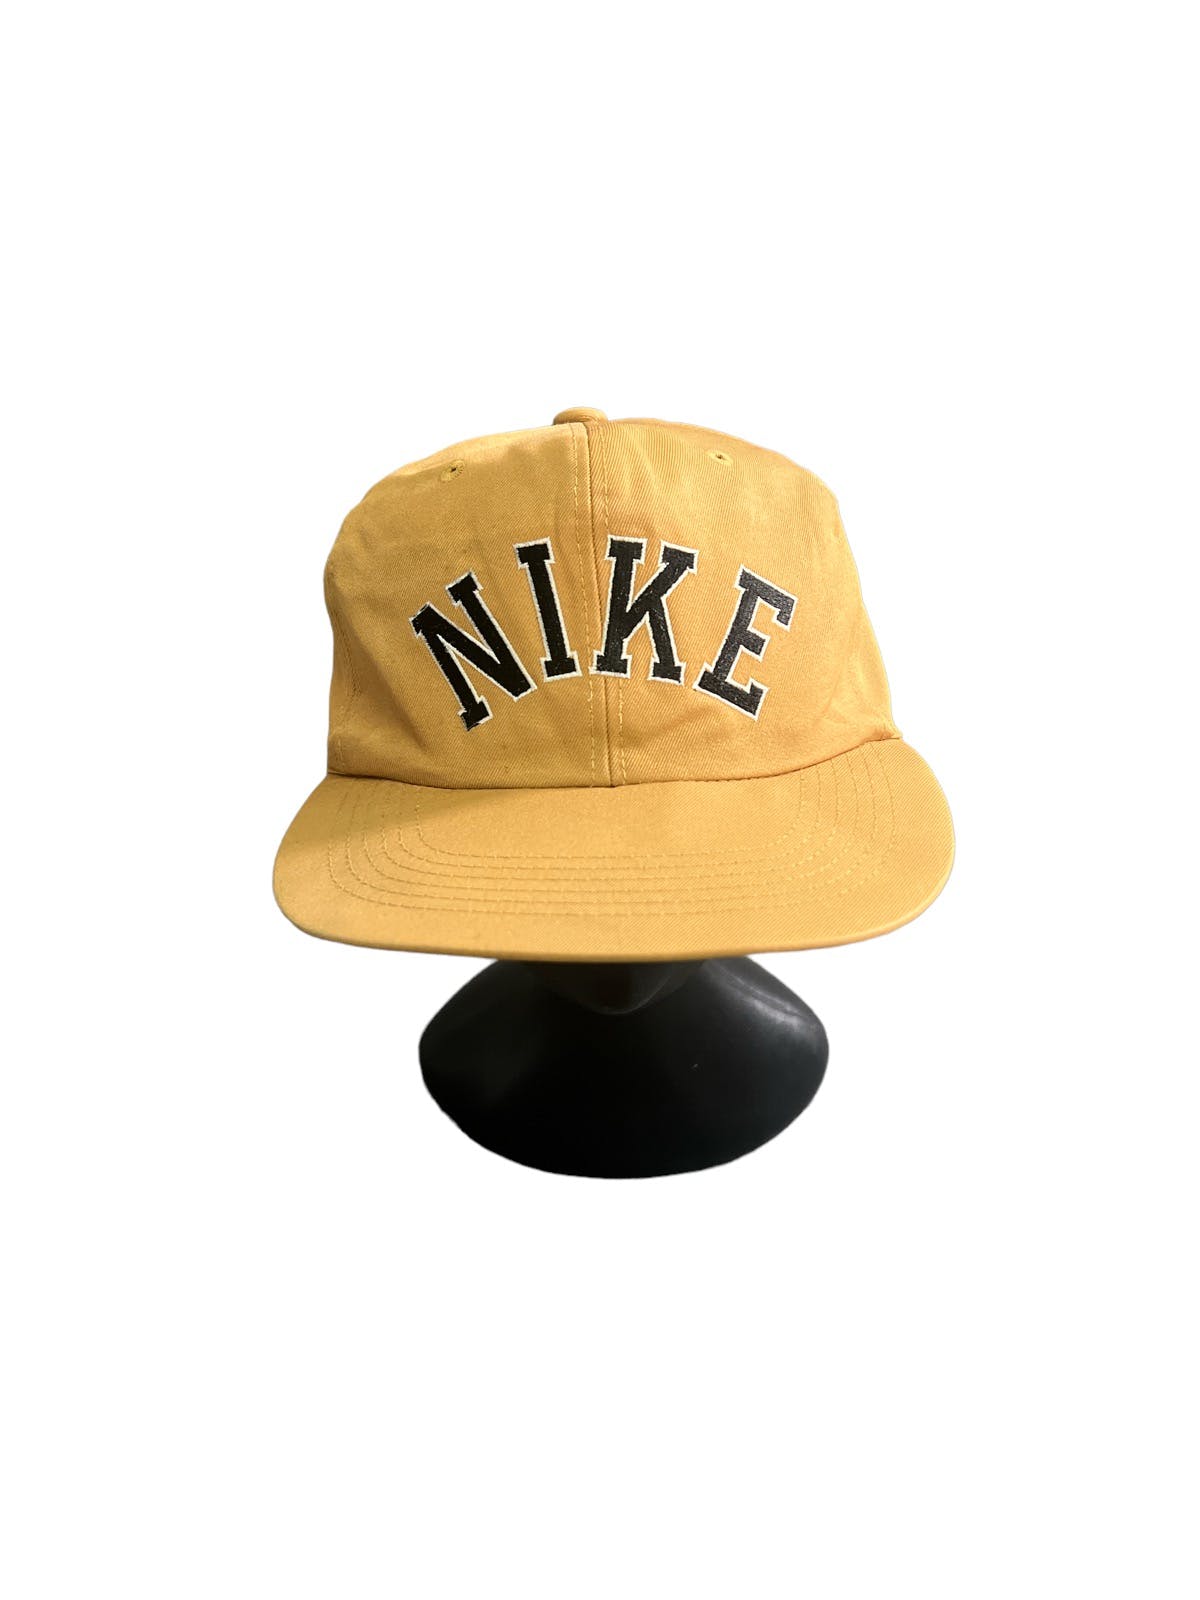 VINTAGE NIKE SPELL OUT FULL CAP - 1